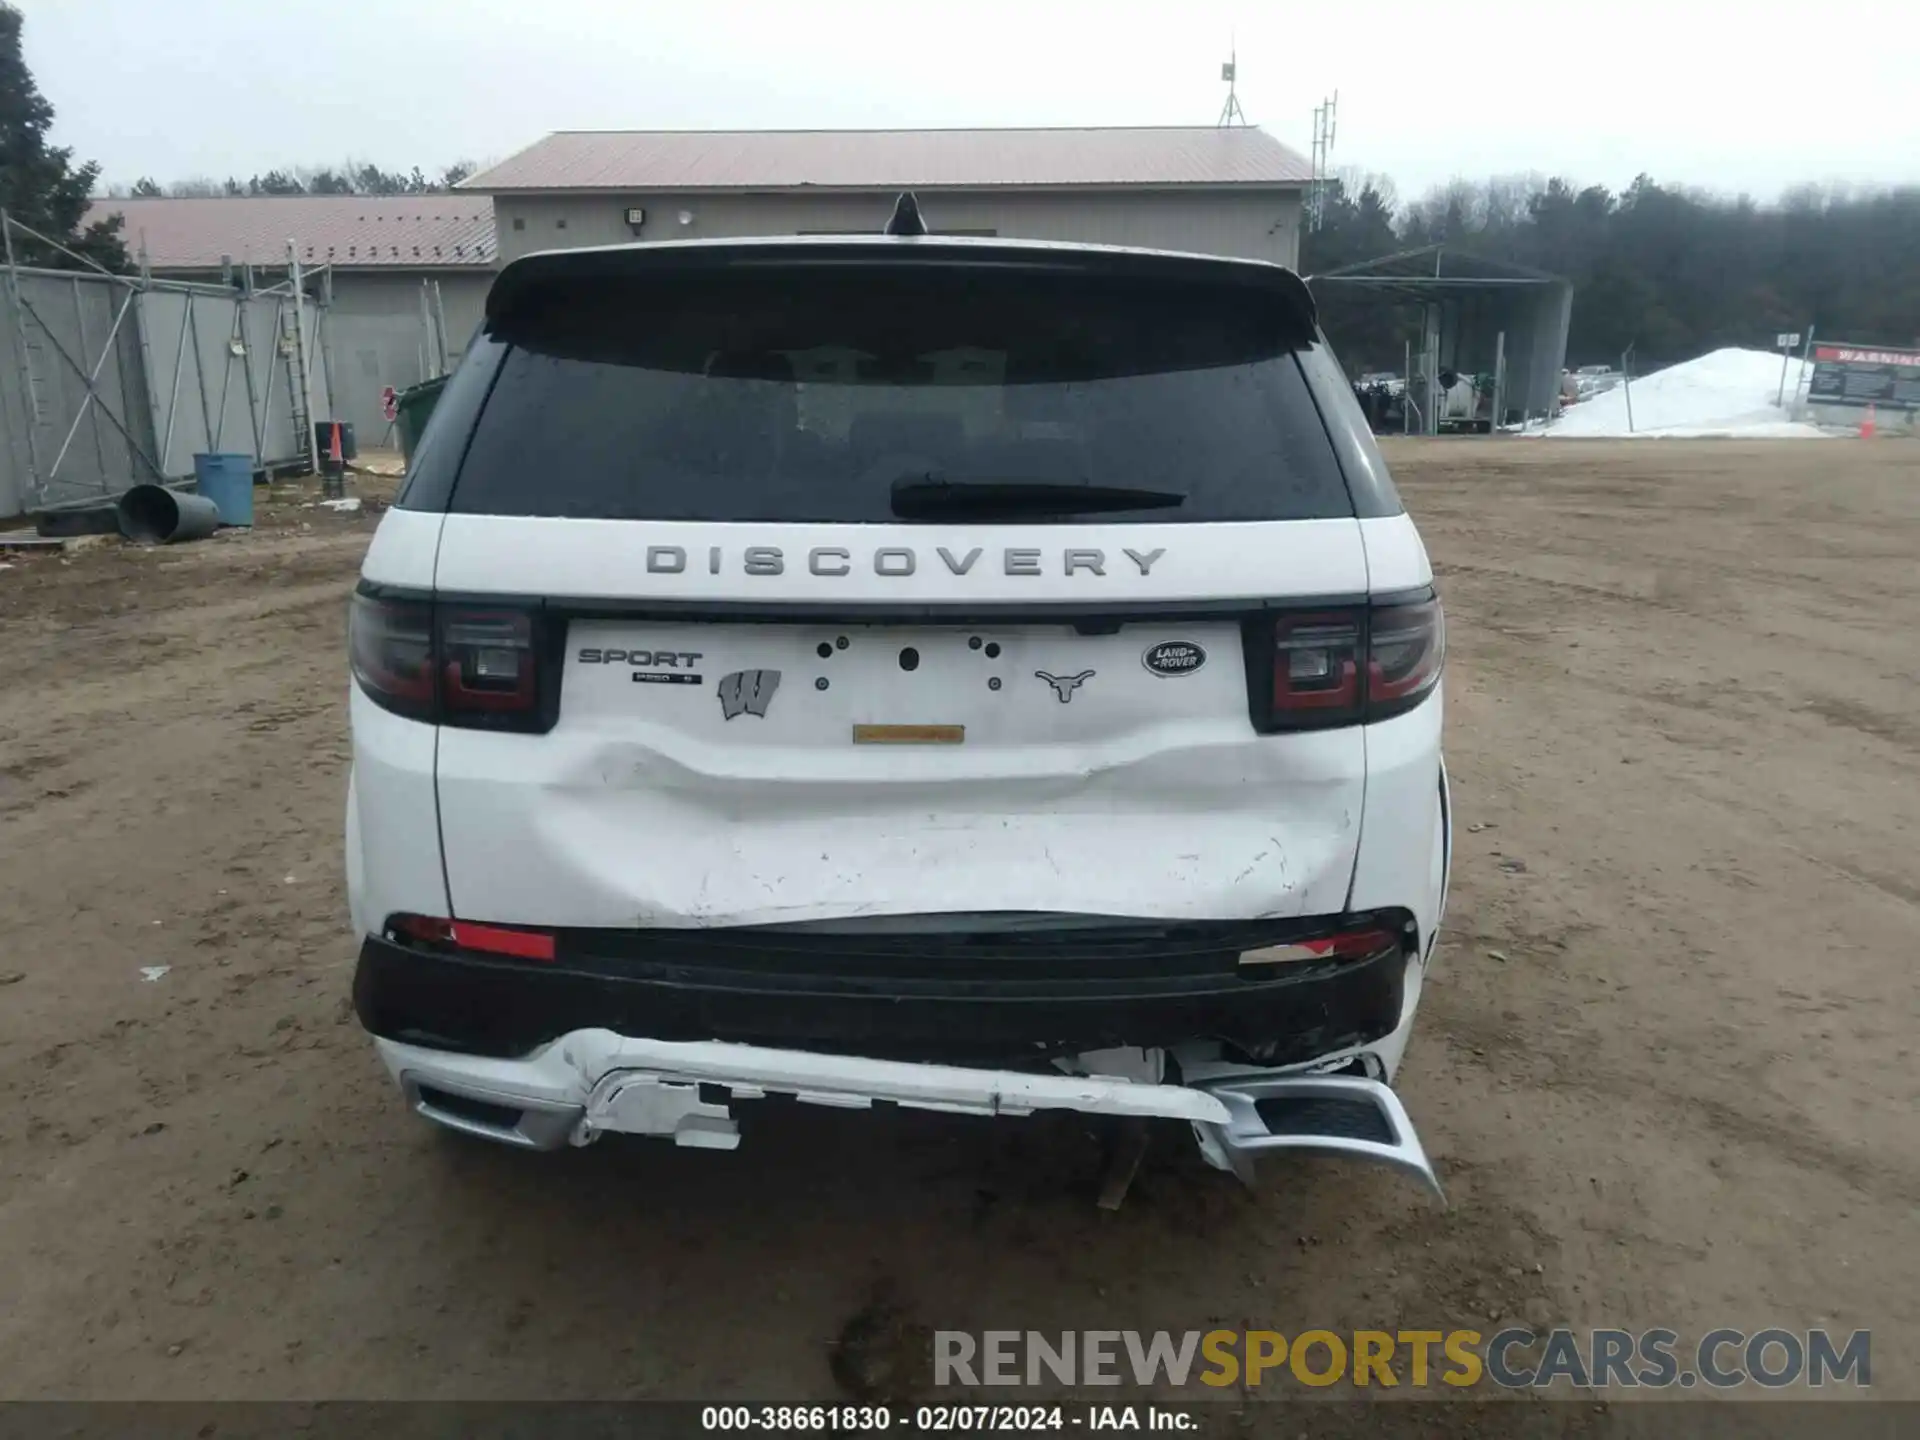 16 Photograph of a damaged car SALCT2FXXLH859485 LAND ROVER DISCOVERY SPORT 2020